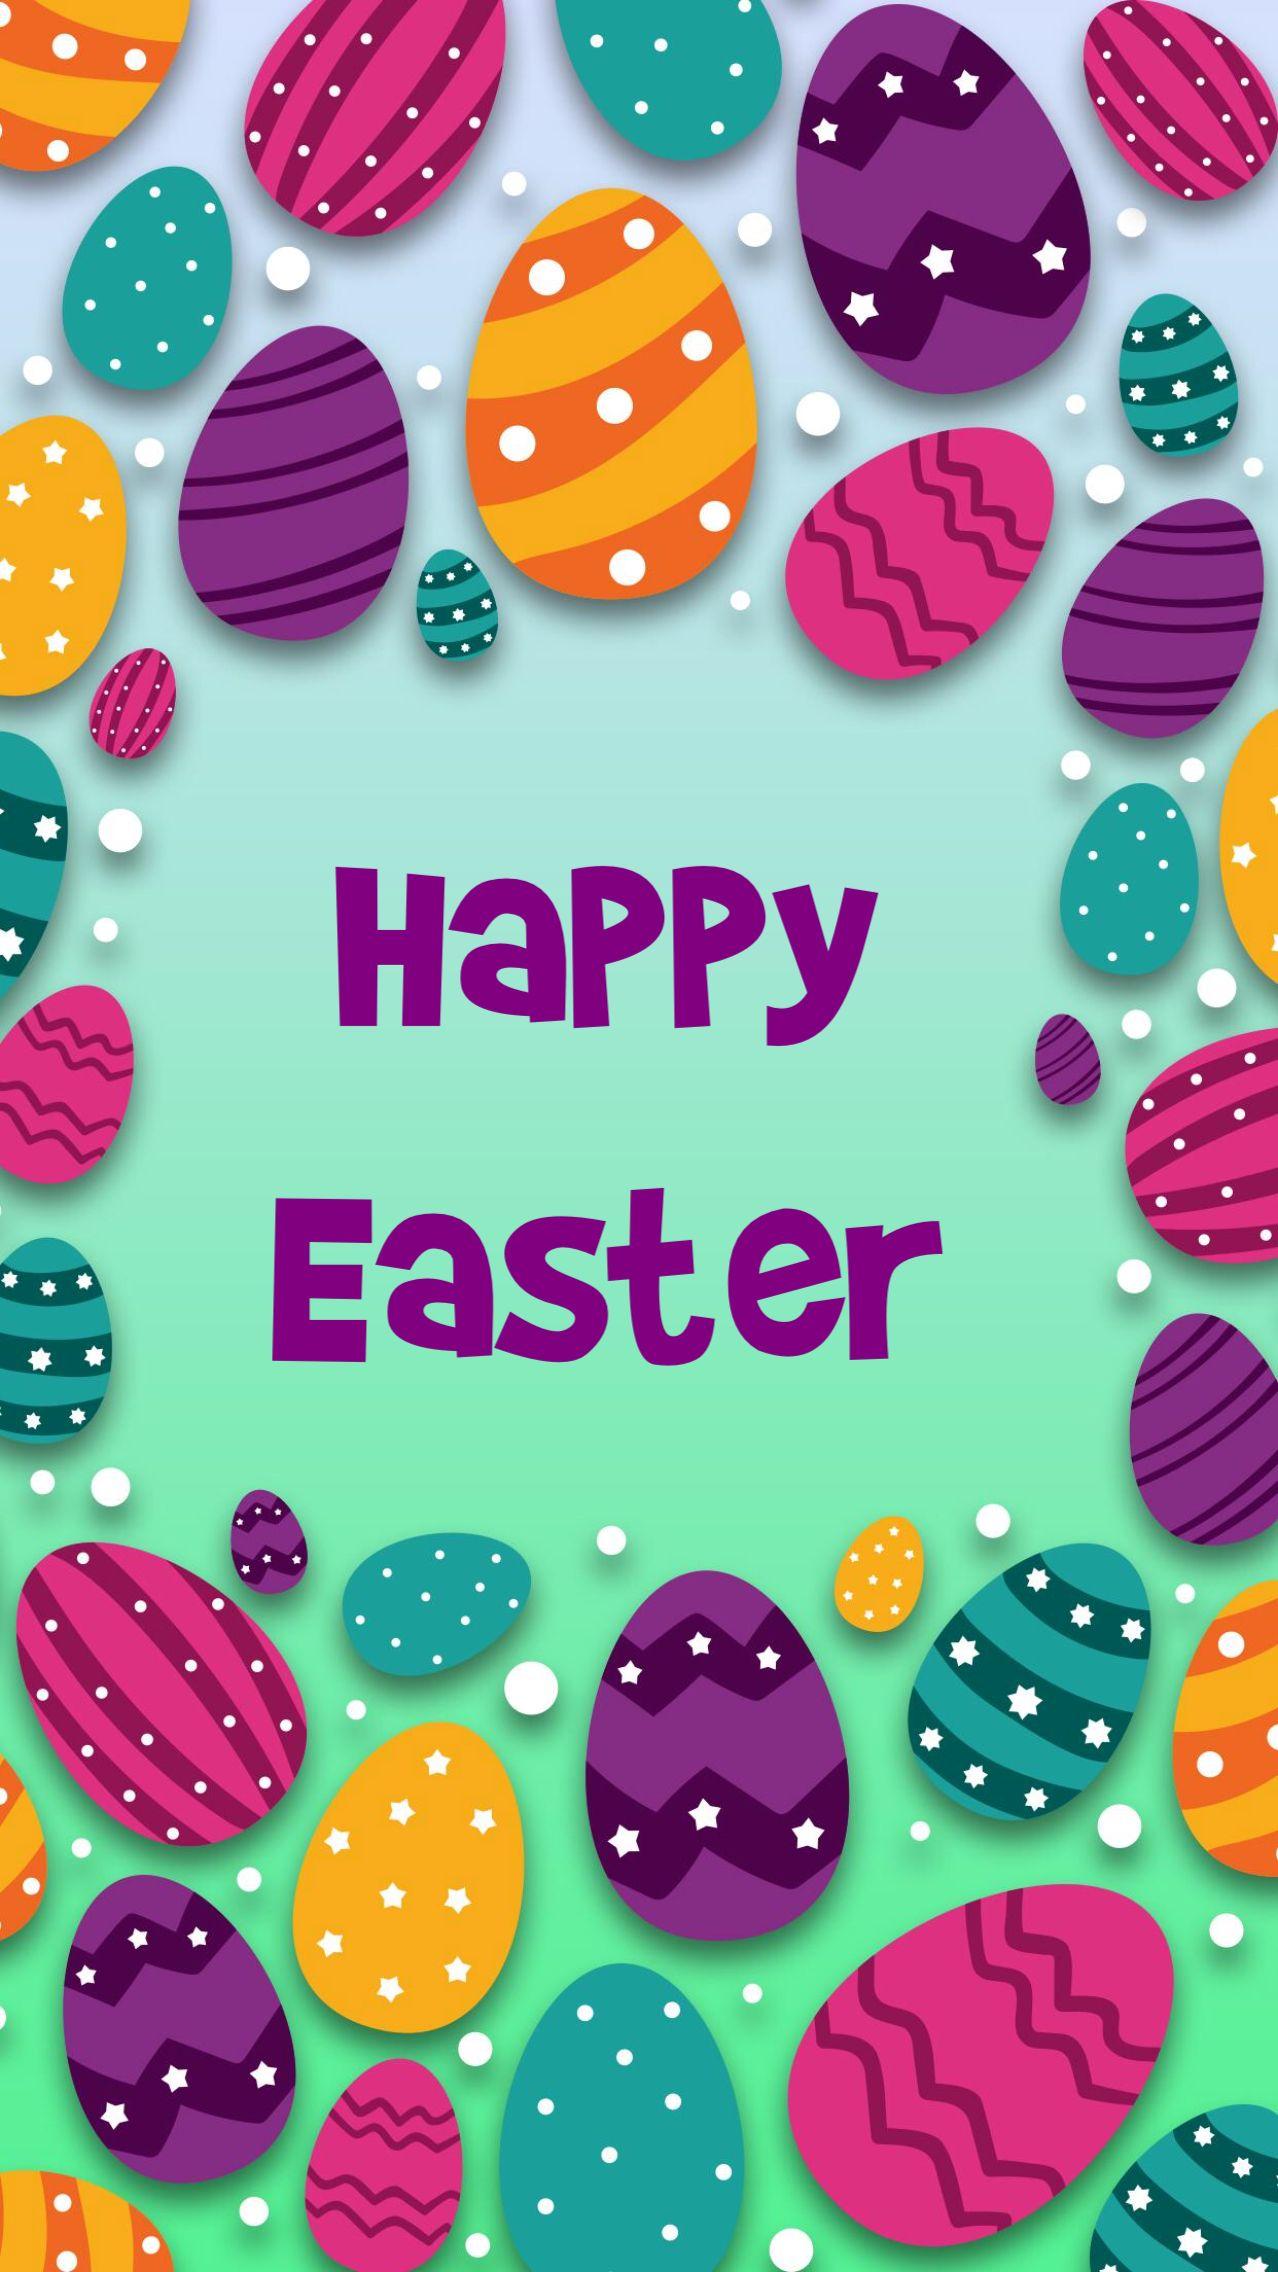 iPhone Wall: Easter tjn. Happy easter wallpaper